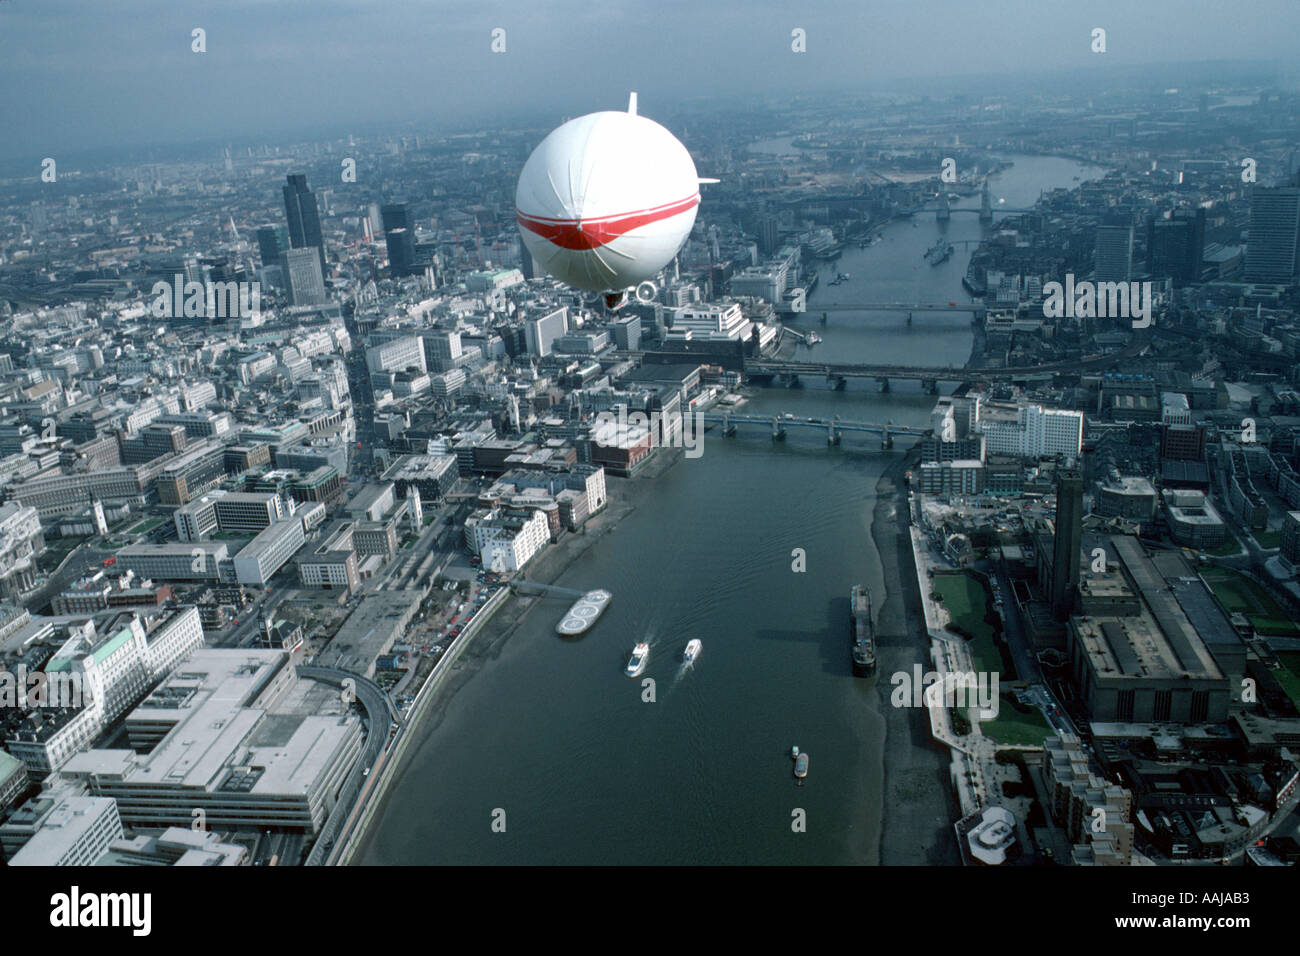 Aerial view of airship over London Stock Photo